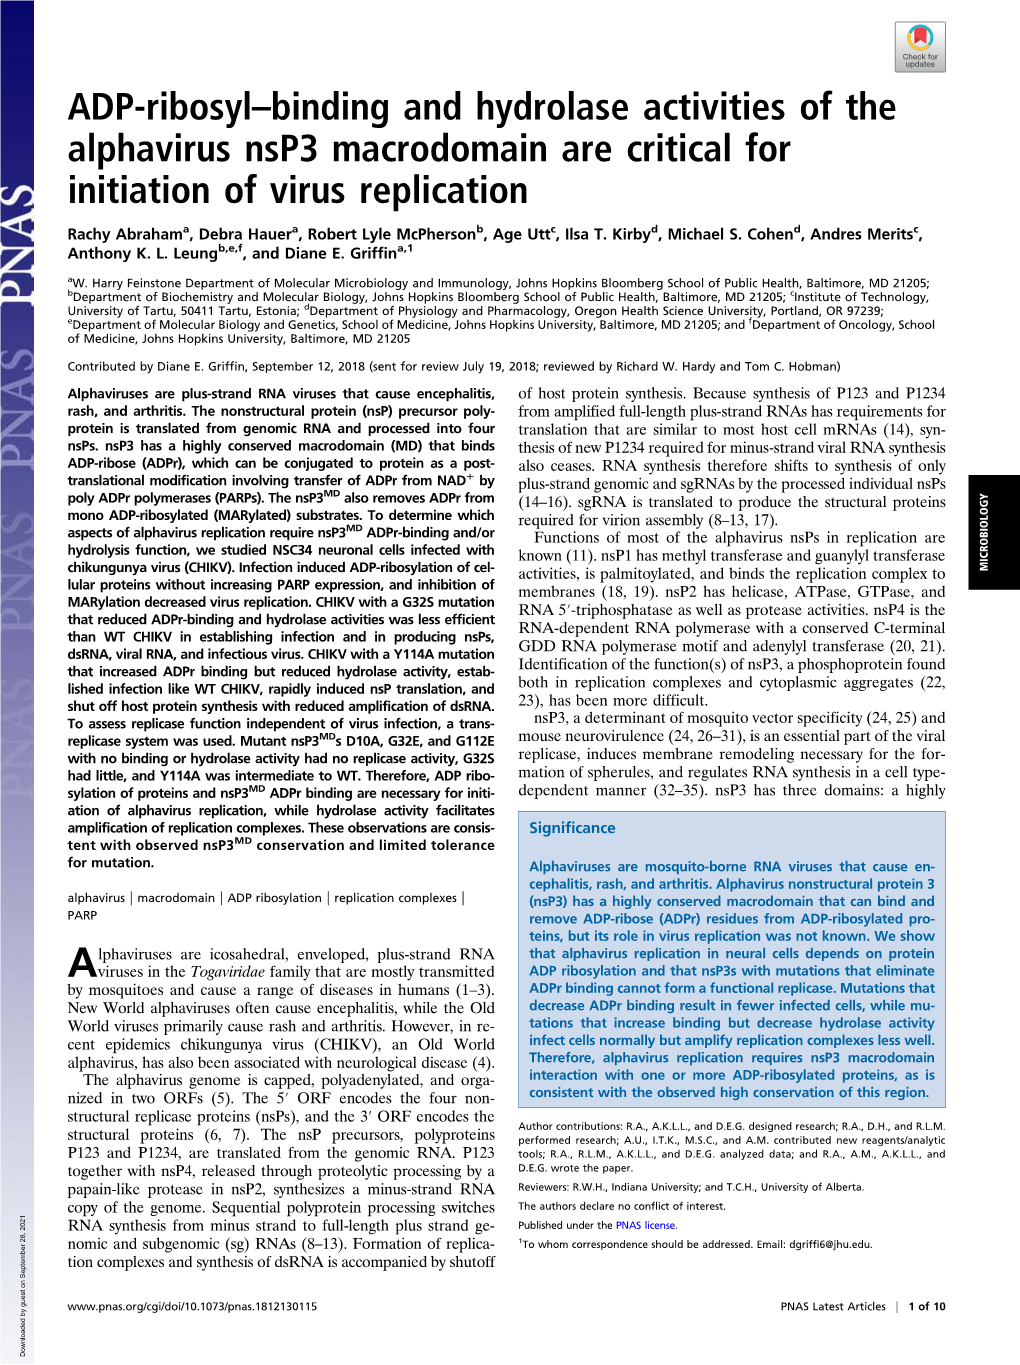 ADP-Ribosyl–Binding and Hydrolase Activities of the Alphavirus Nsp3 Macrodomain Are Critical for Initiation of Virus Replication